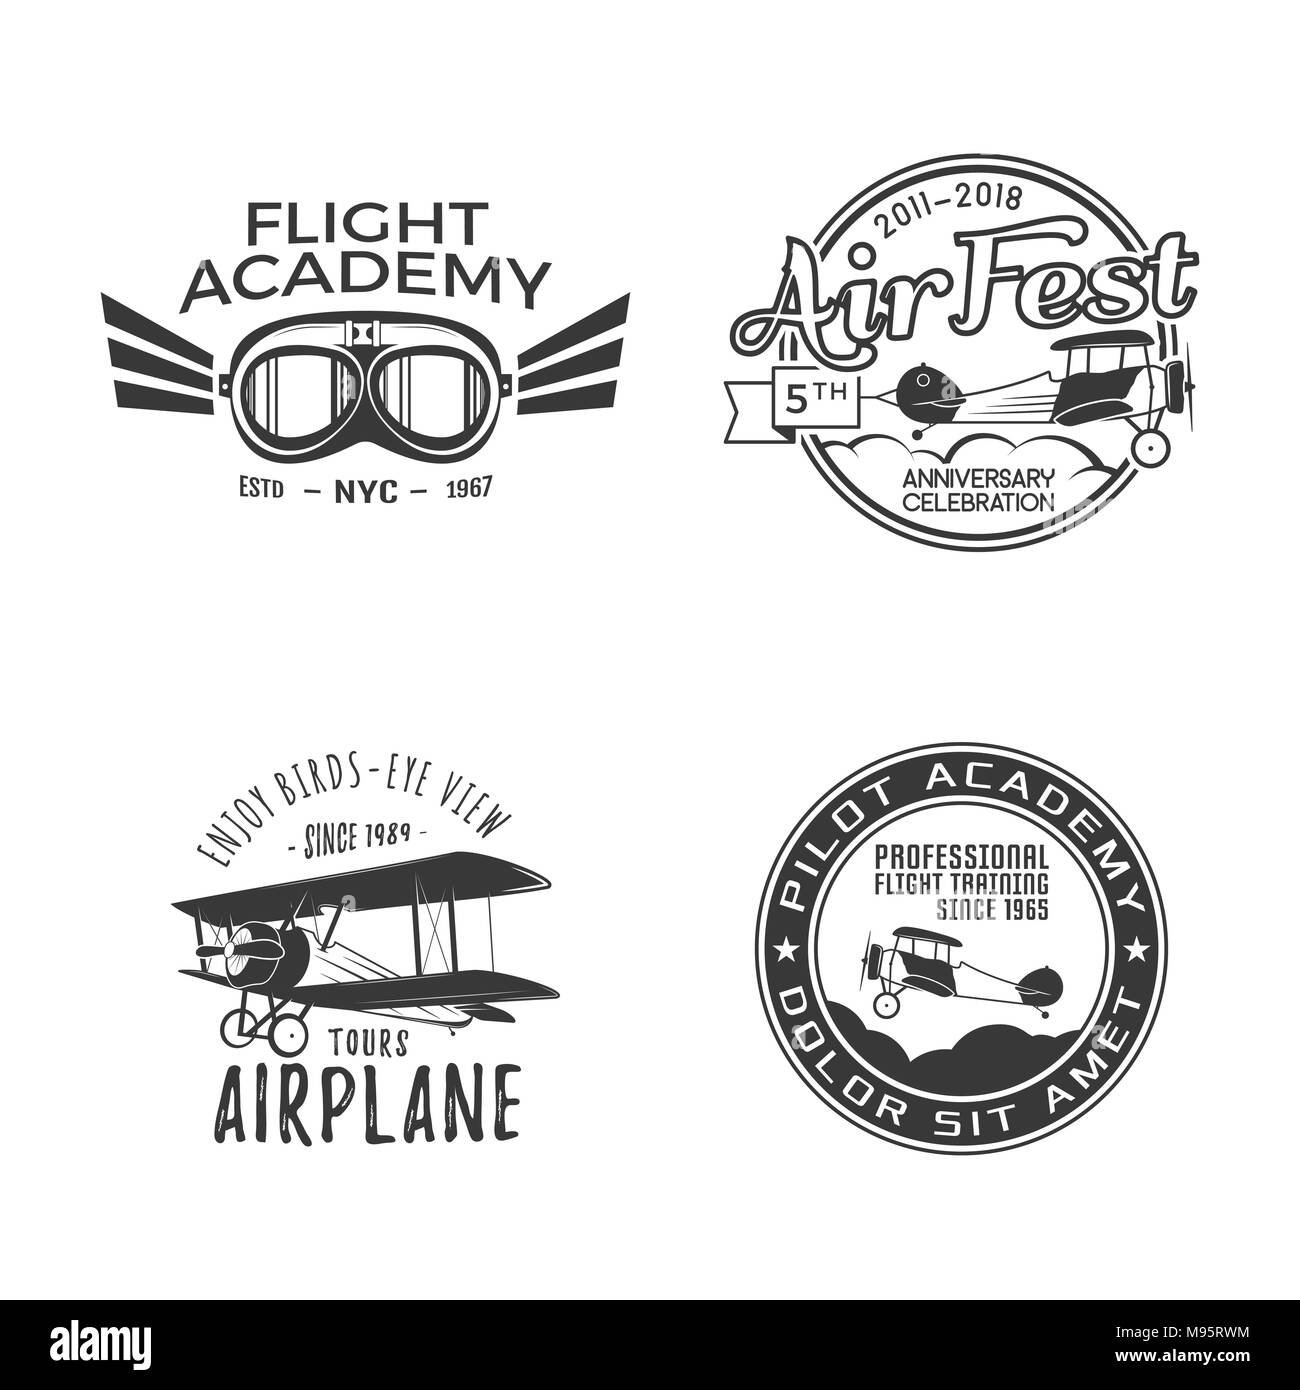 Vintage hand drawn old fly stamps. Travel or business airplane tour emblems. Airplane logo designs. Retro aerial badge. Pilot school logos. Plane tee design, prints. Stock vector patches isolated Stock Vector